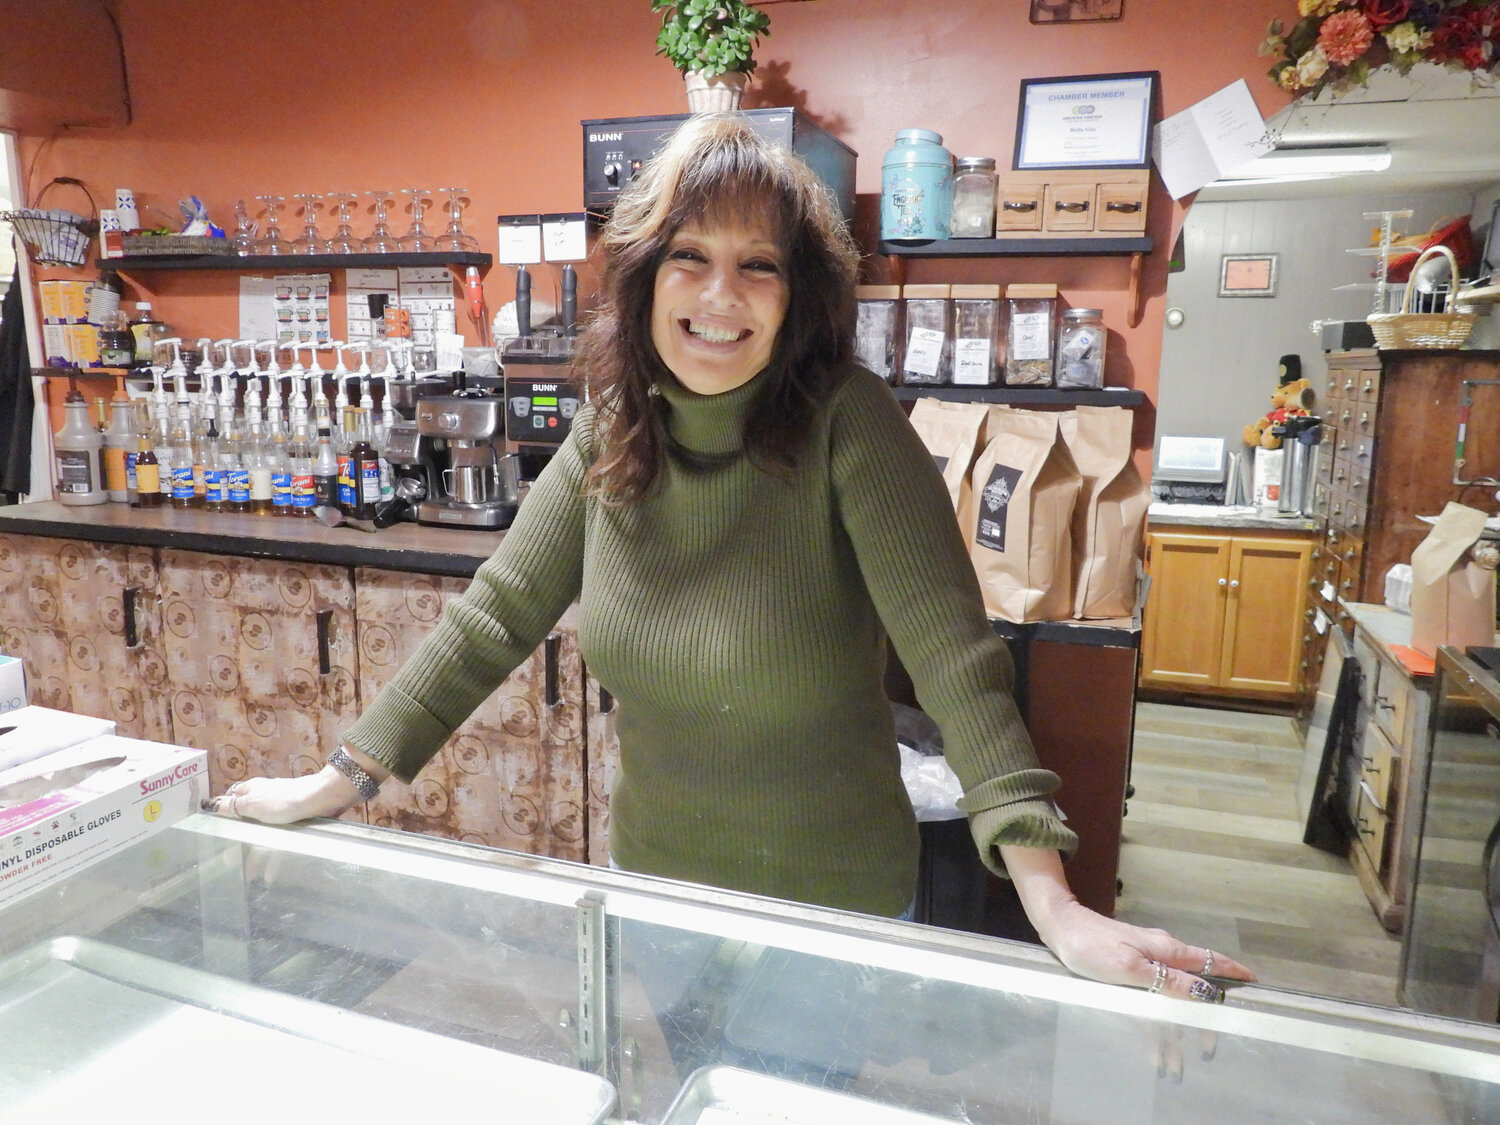 Bella Vita Owner Lori Seef said the Oneida community has been very supportive of her new business — and she’s been working to give back through a variety of community events and projects.